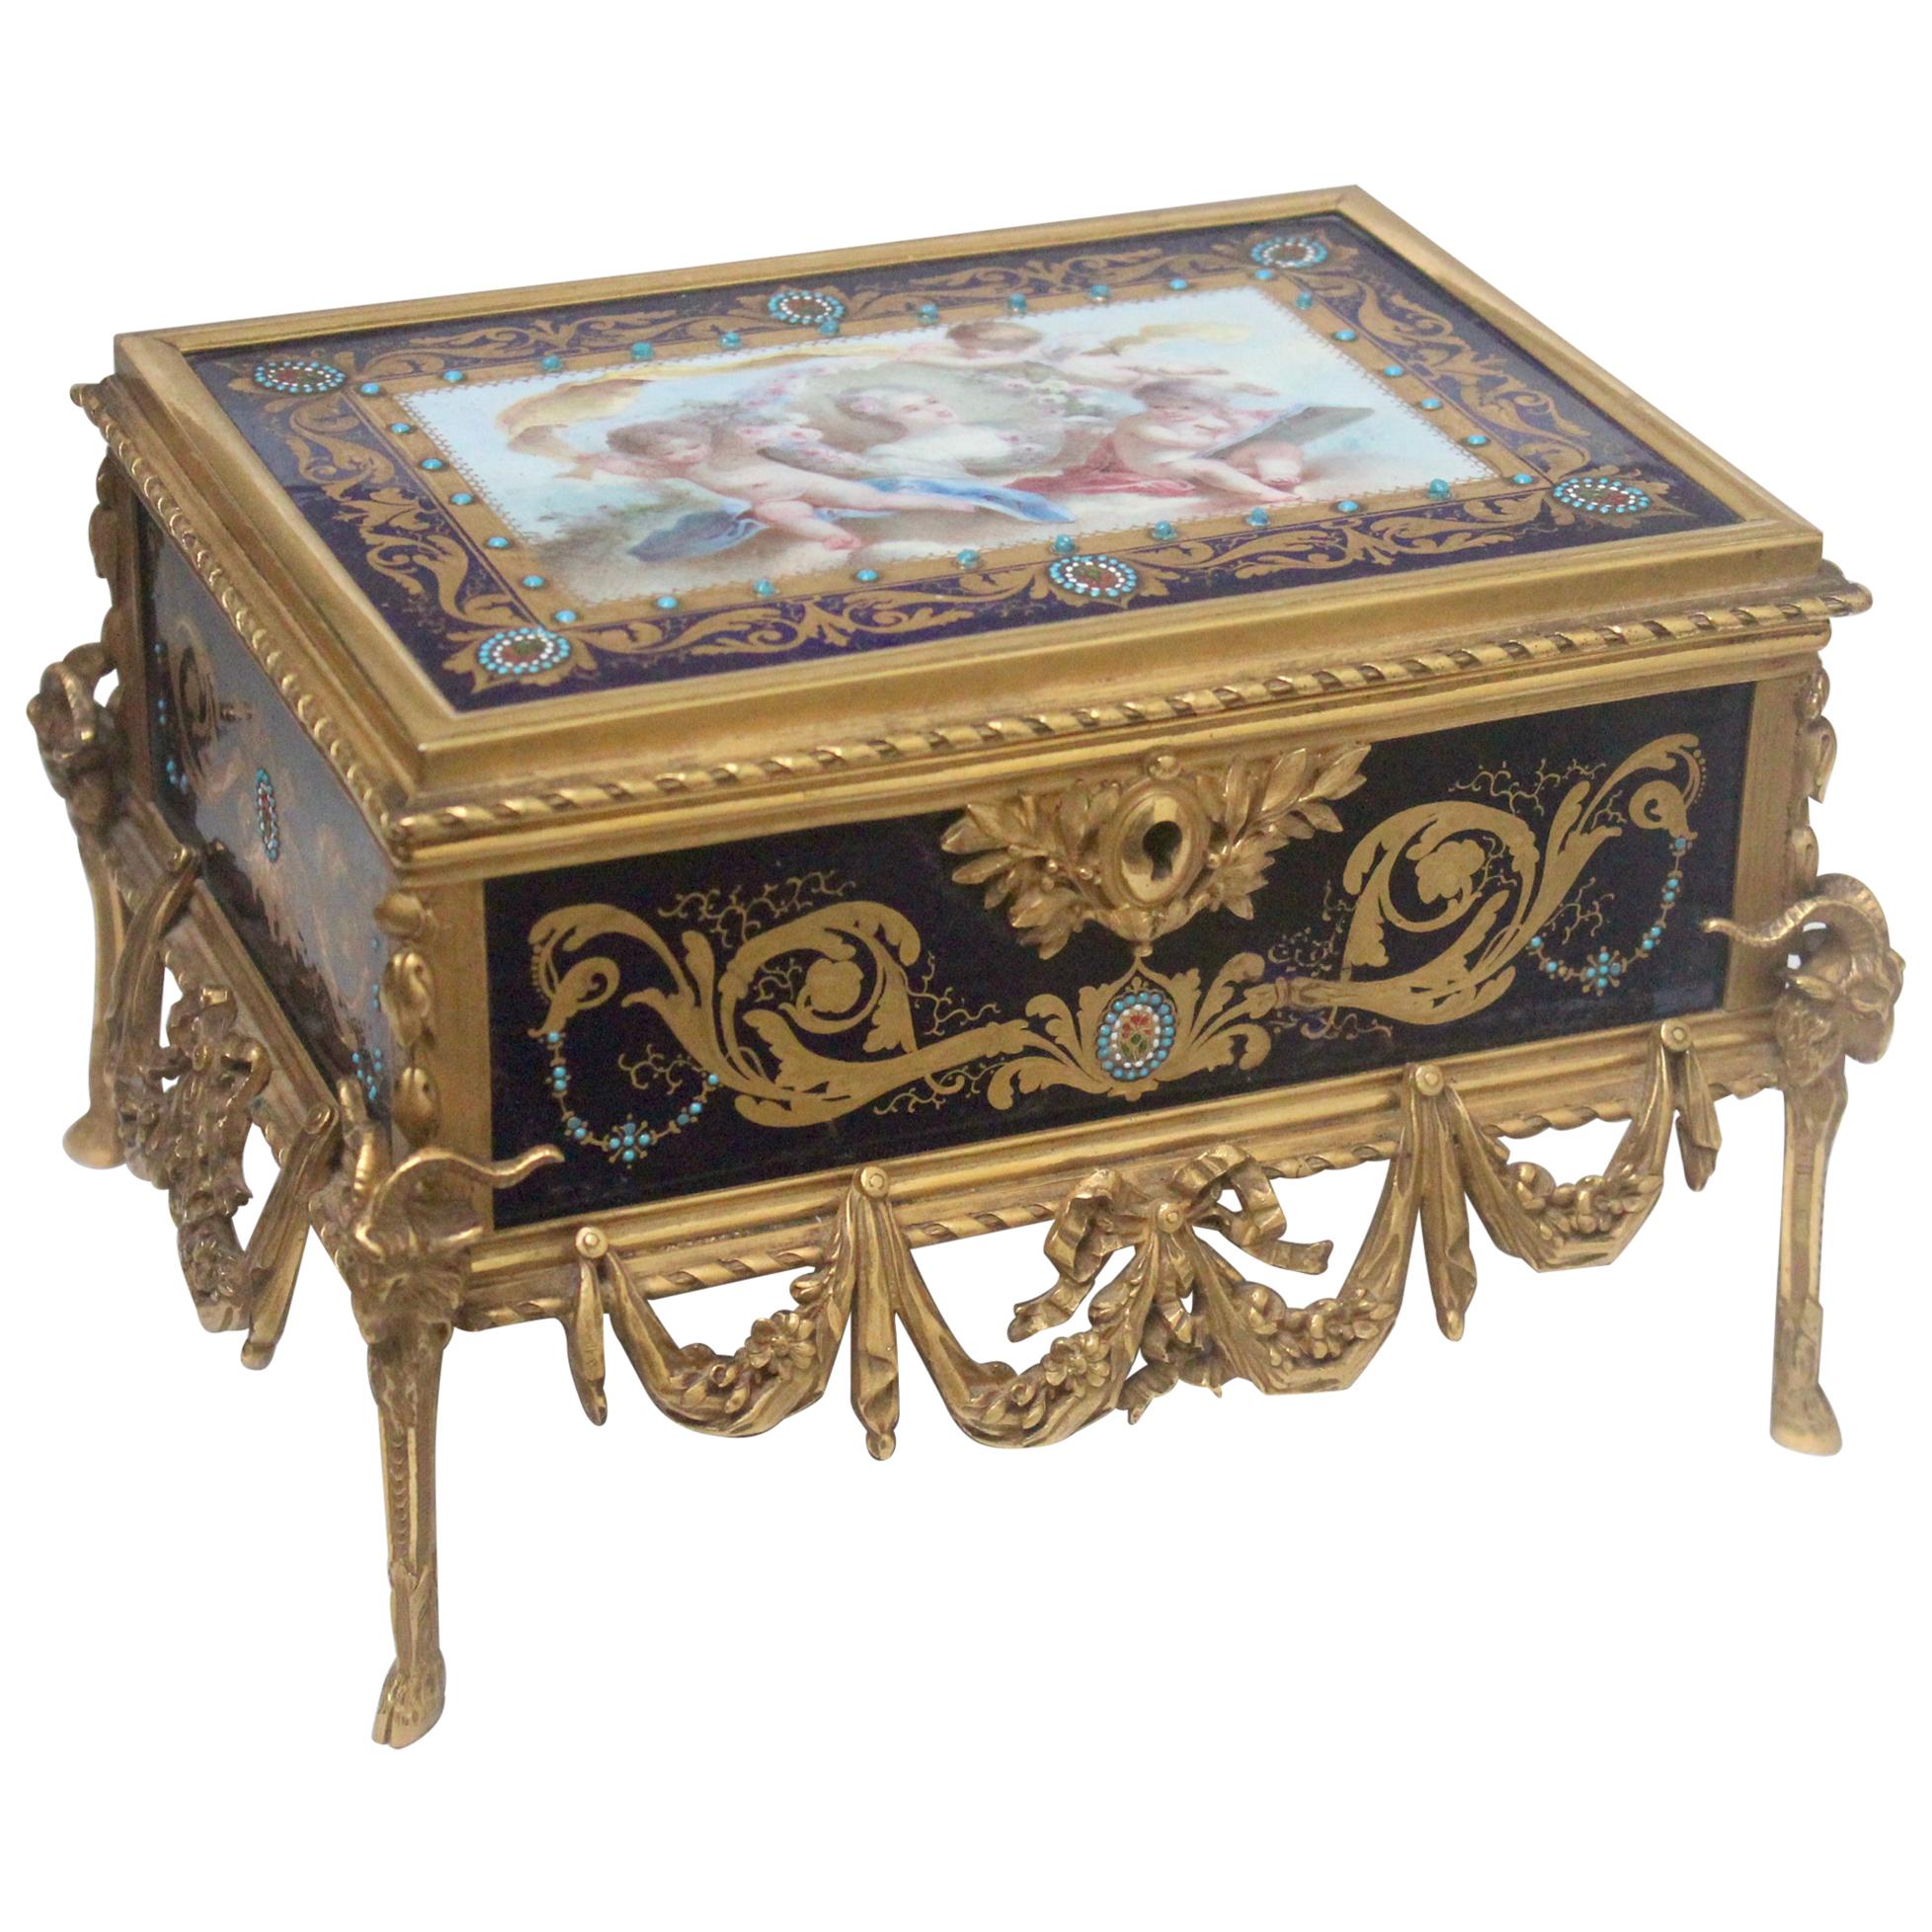 French 19th Century Enameled and Ormolu-Mounted Jewelry Casket